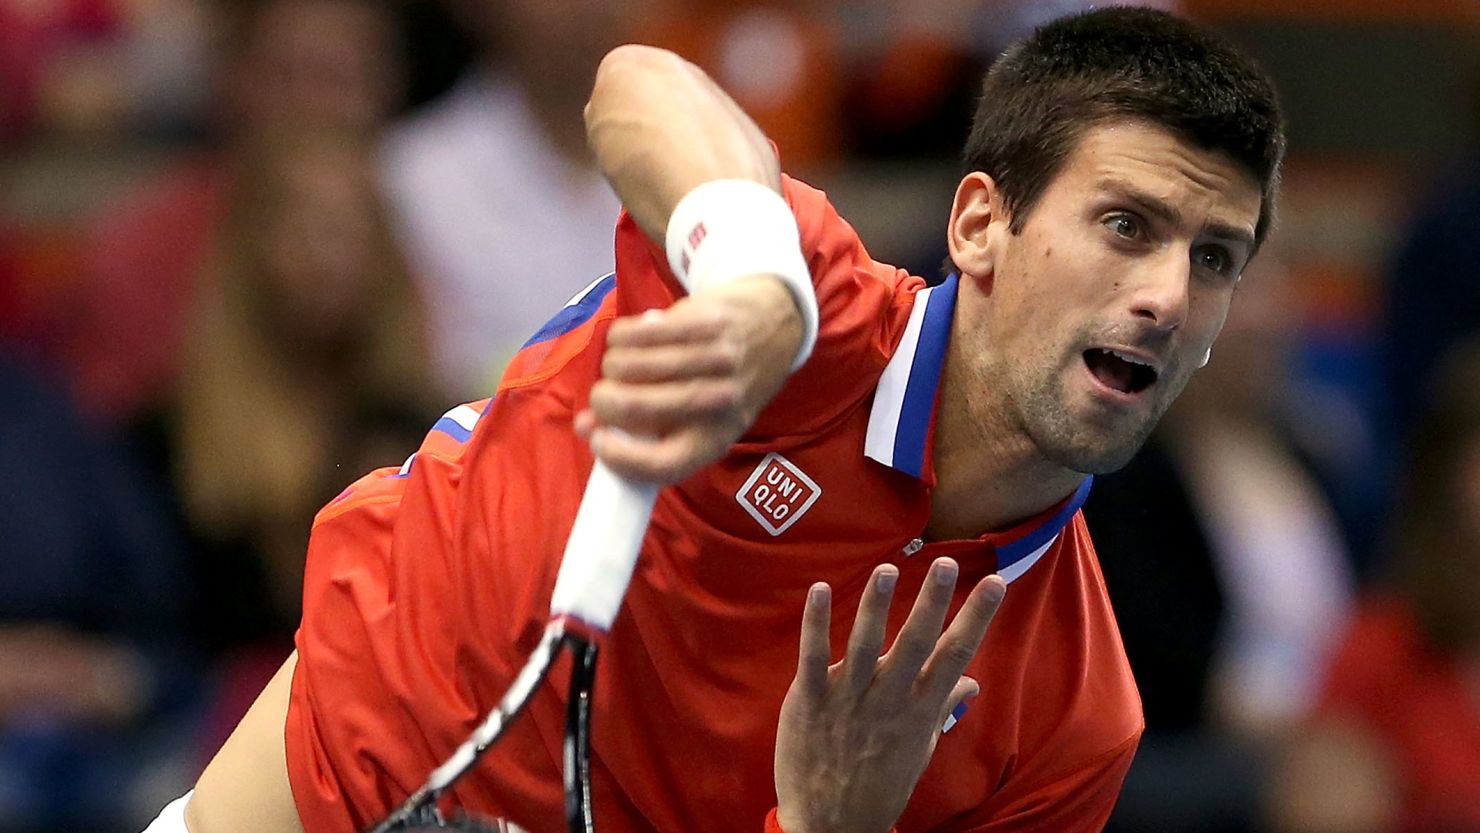 World No. 1 Novak Djokovic will be fit to take part in the Monte Carlos Masters